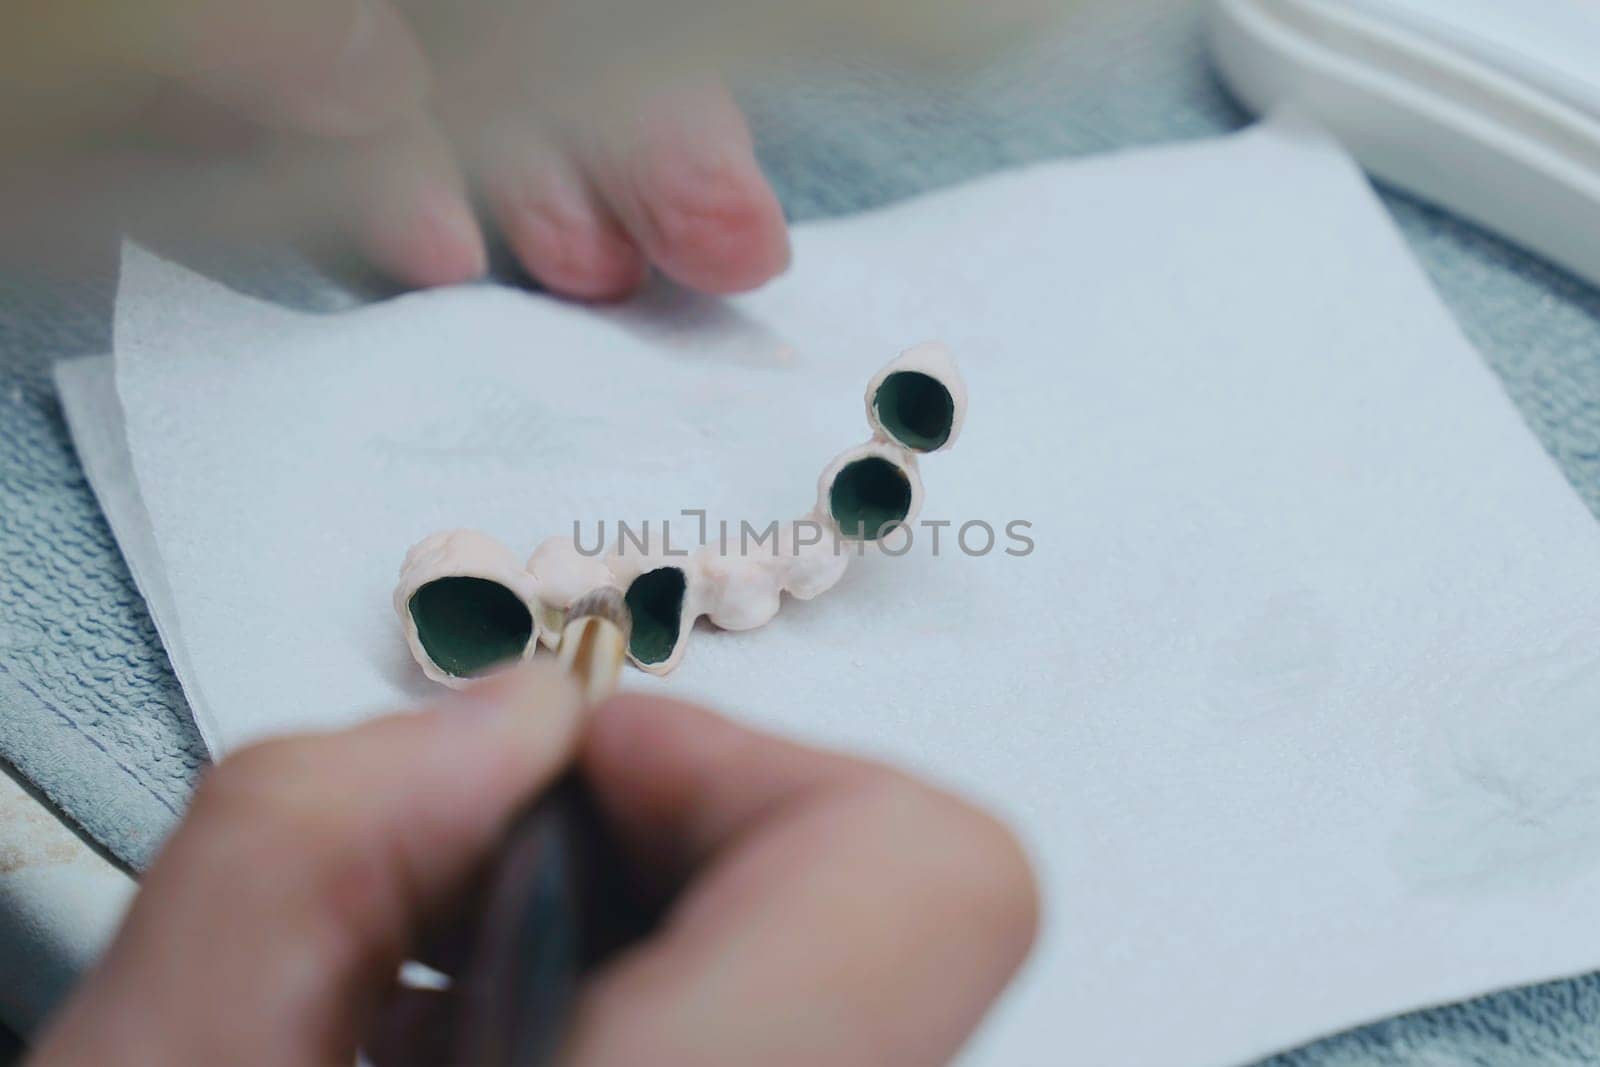 Dental Technician Working With Ceramic Crowns In Dental Laboratory. Close-up